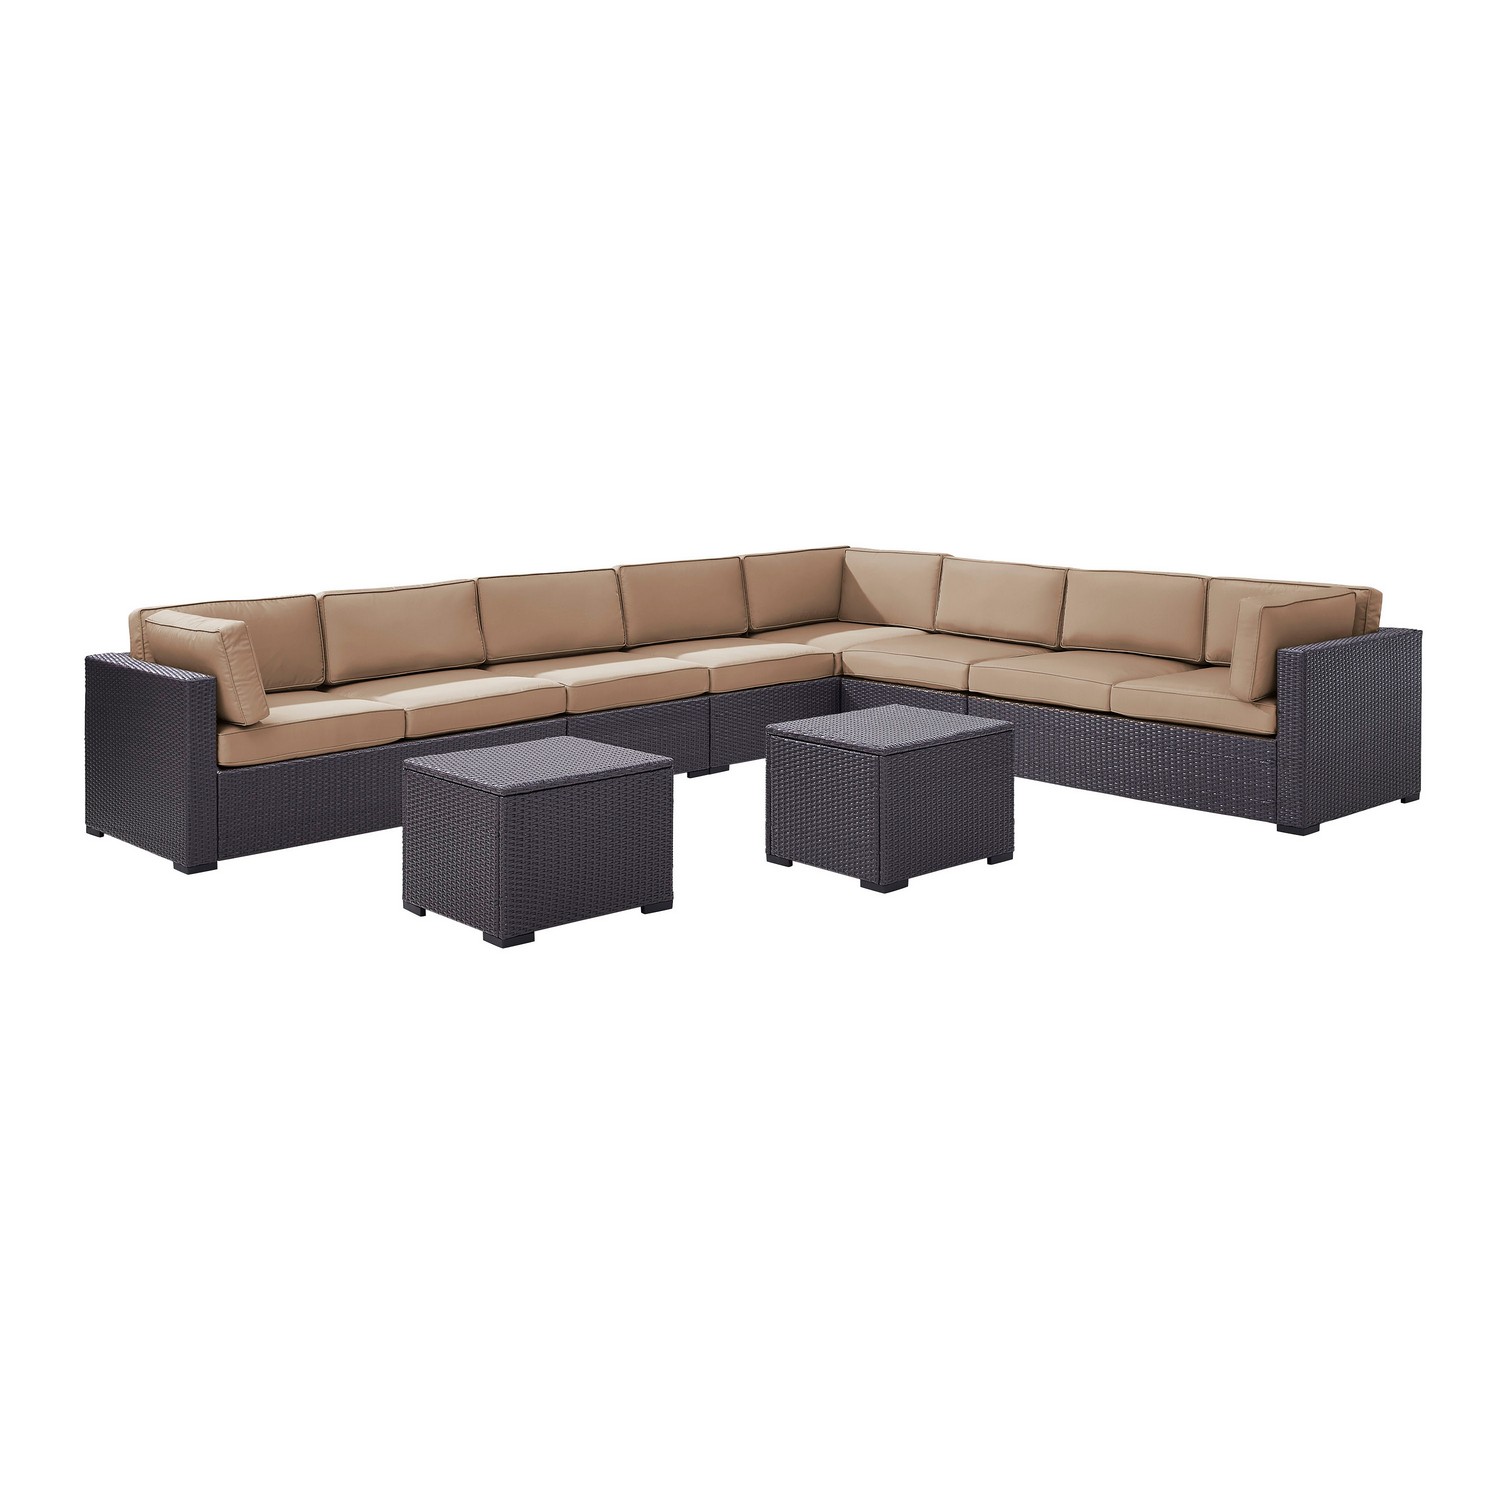 Crosley Biscayne 7-PC Outdoor Wicker Sectional Set - 3 Loveseats, 2 Armless Chair, 2 Coffee Tables - Mocha/Brown